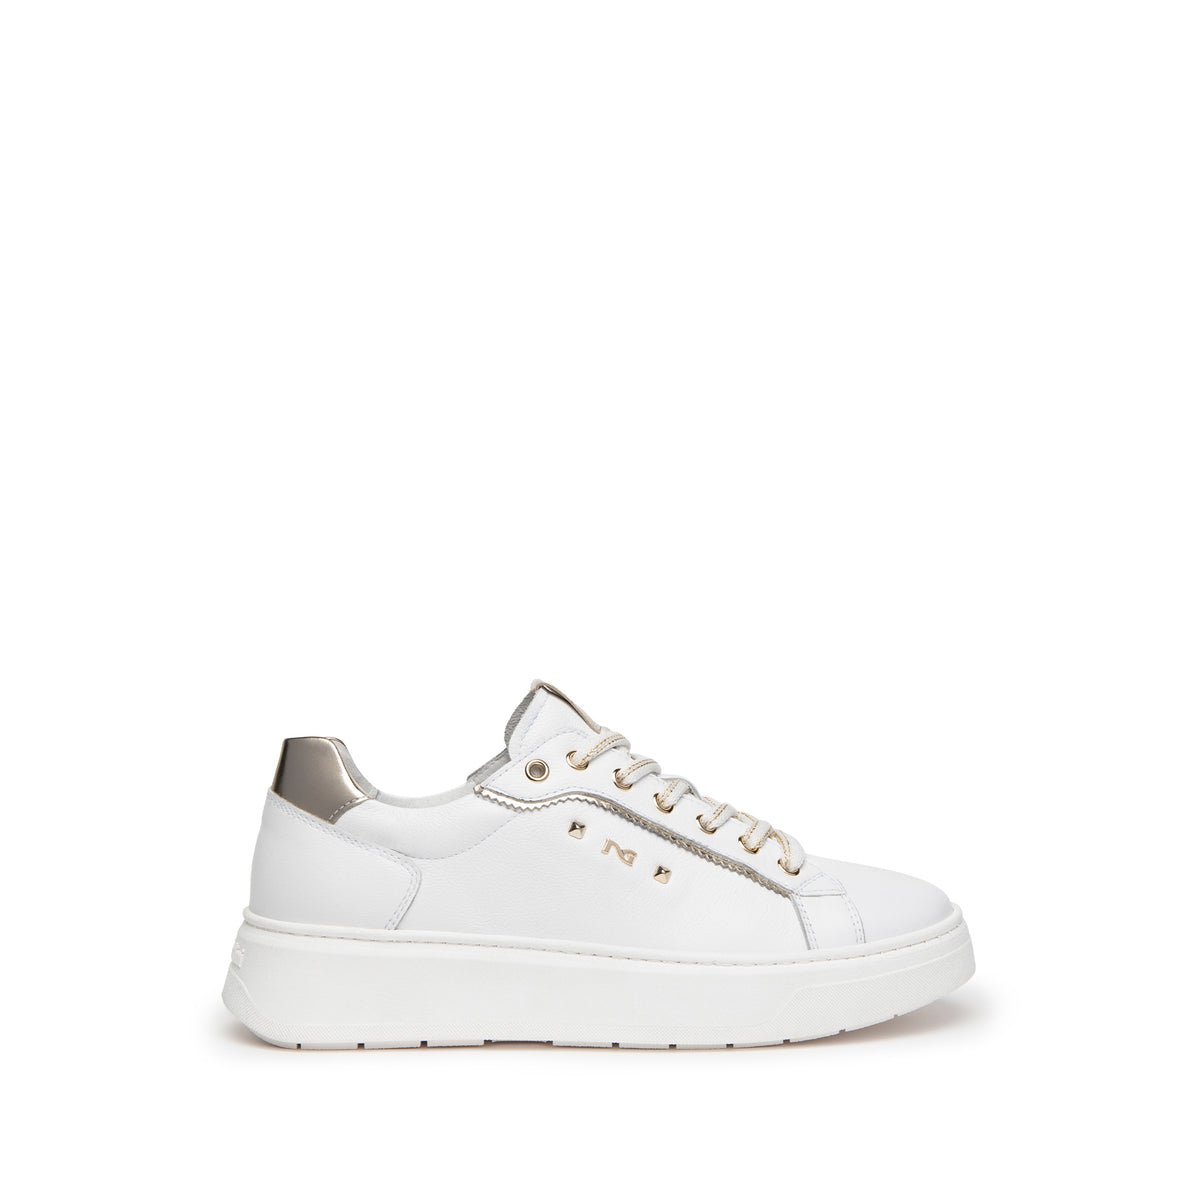 Nerogiardini - E409977D White Trainers with a Gold Trim [Preorder for May 2nd]